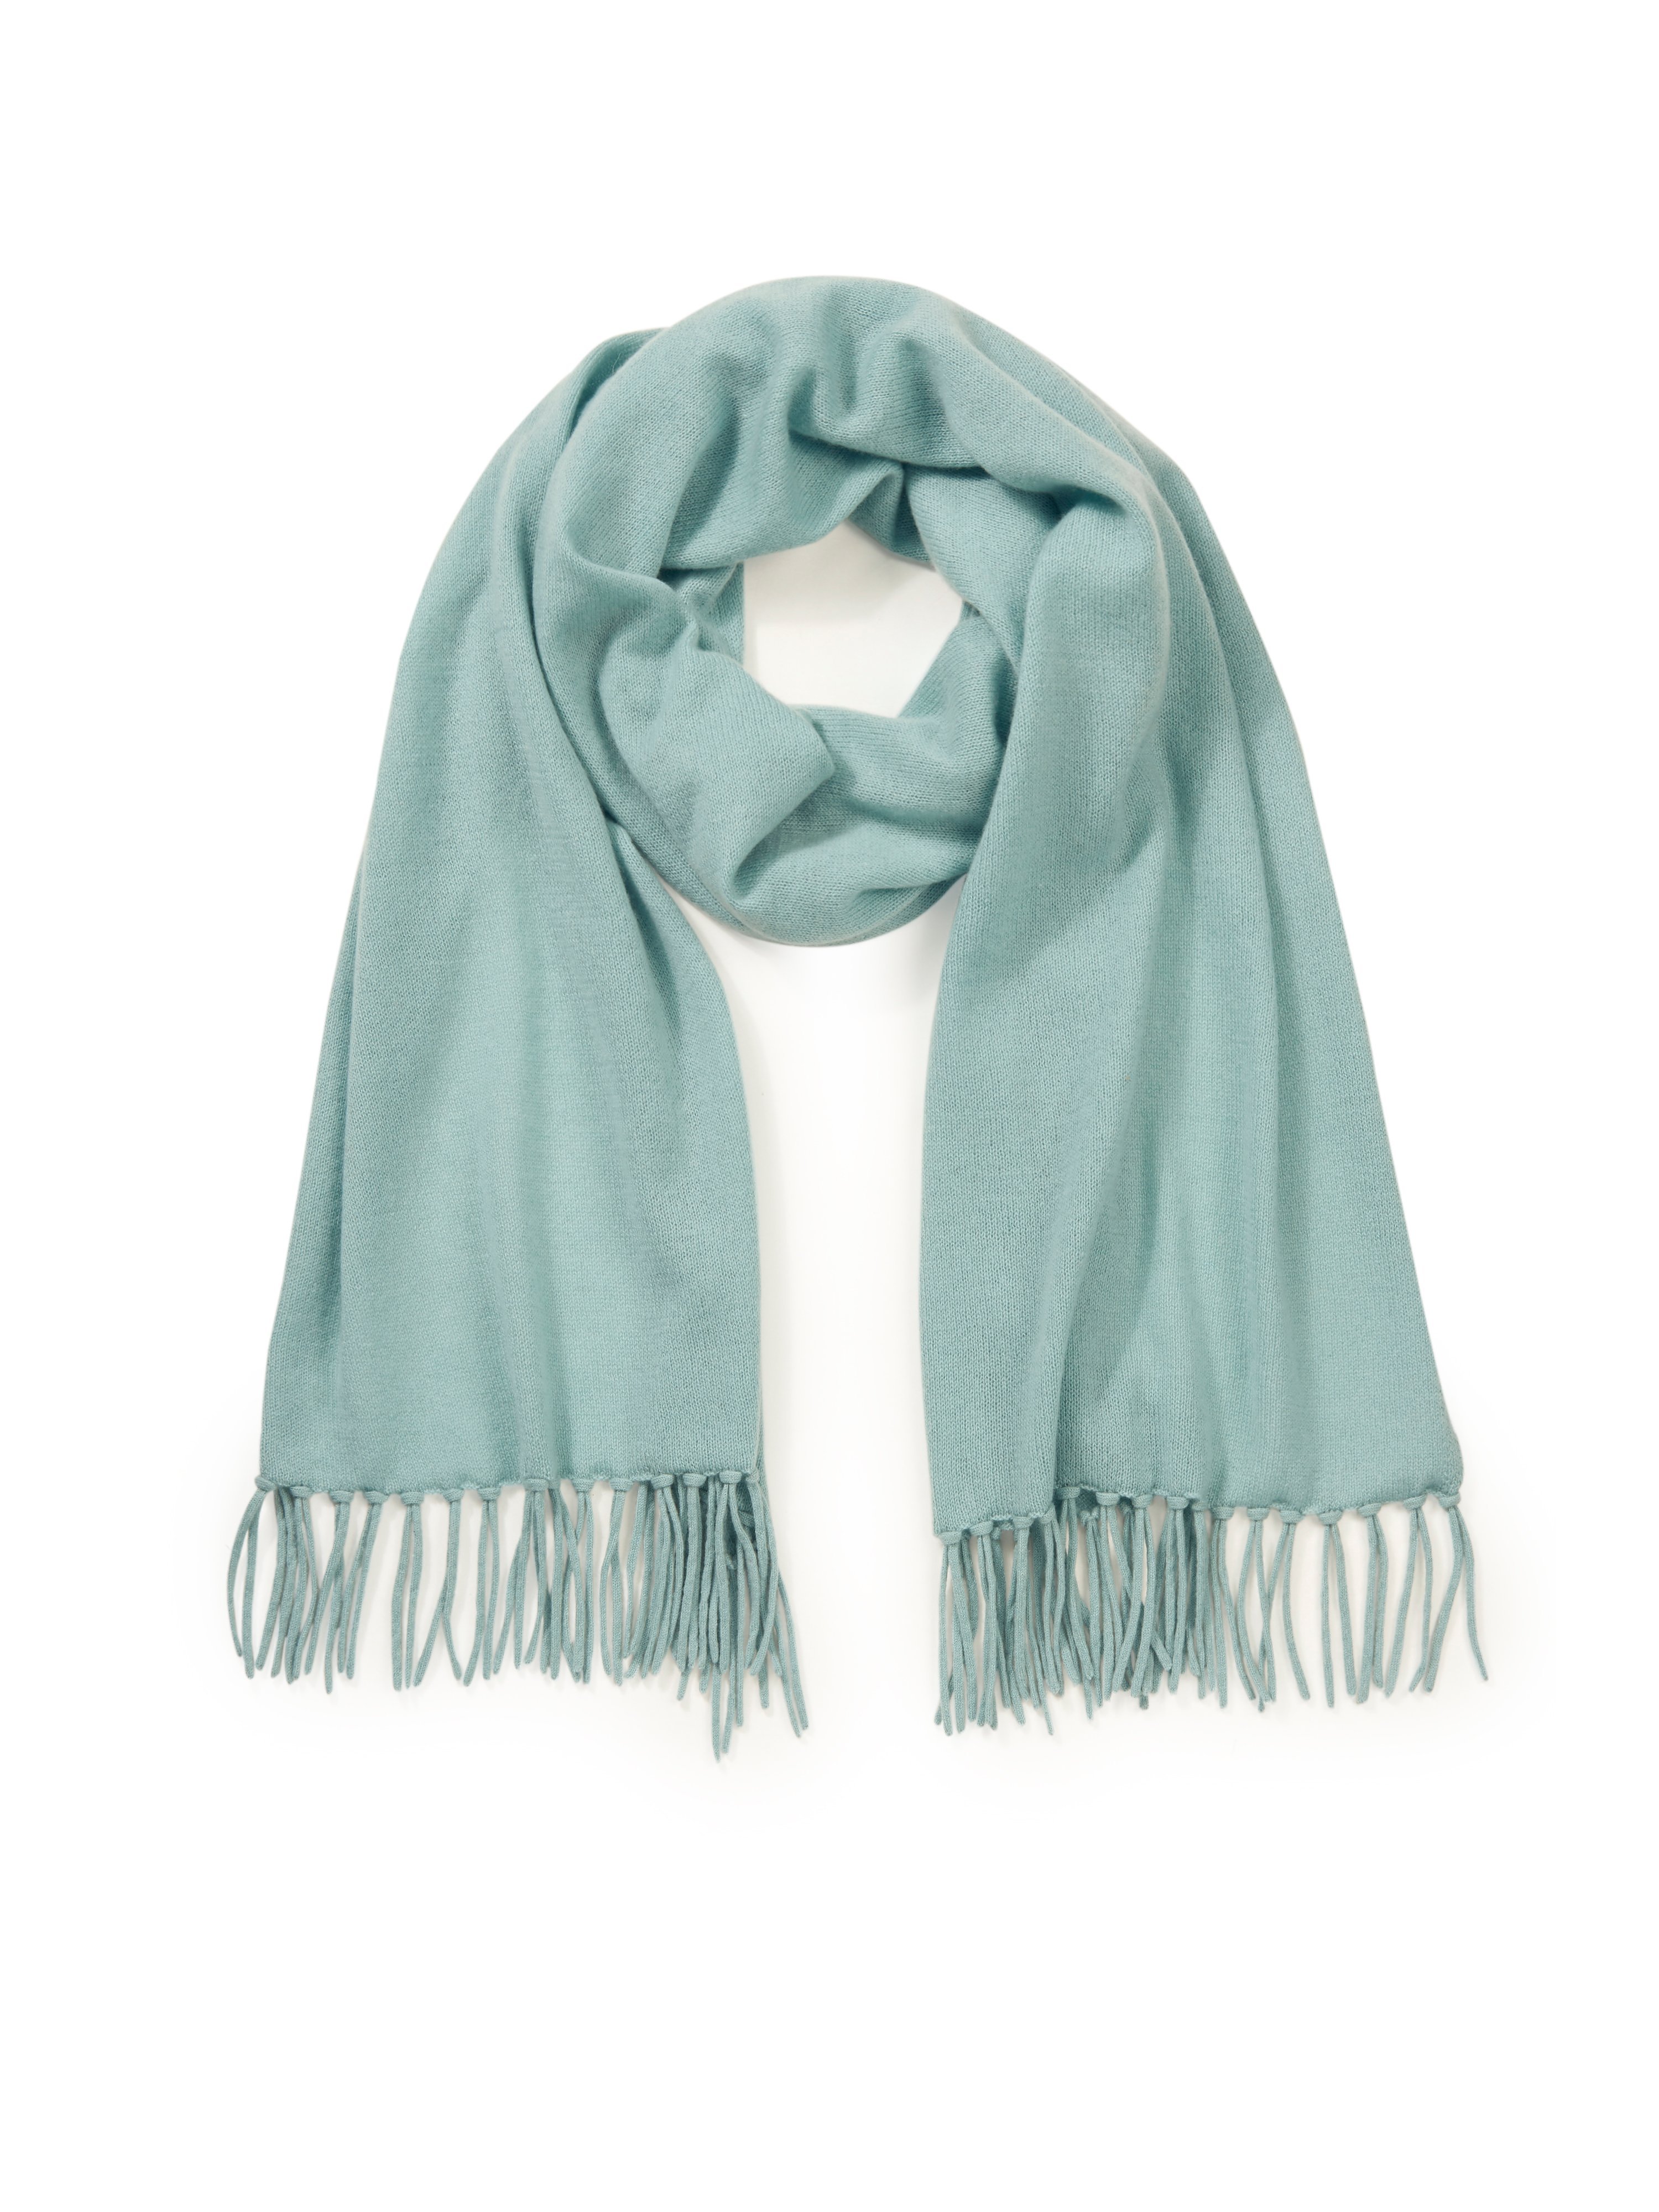 Scarf long fringes at the edges include turquoise